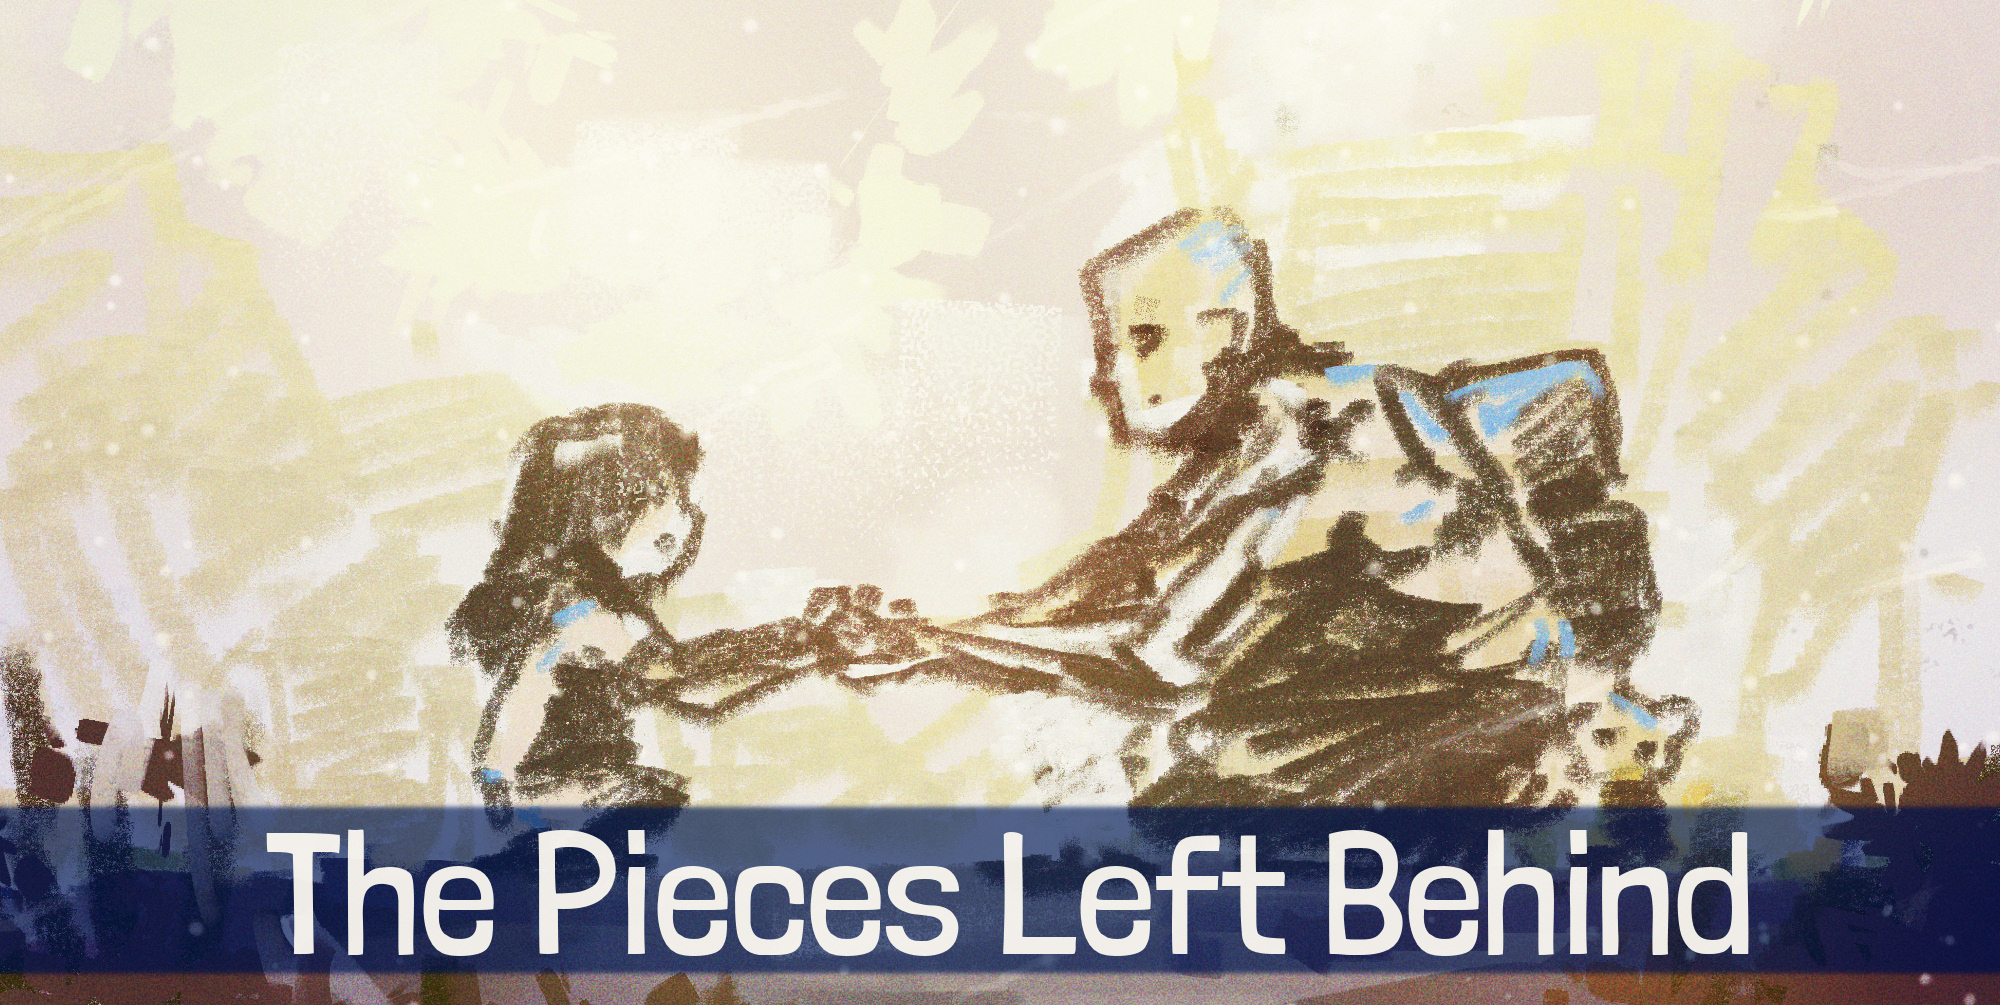 The Pieces Left Behind